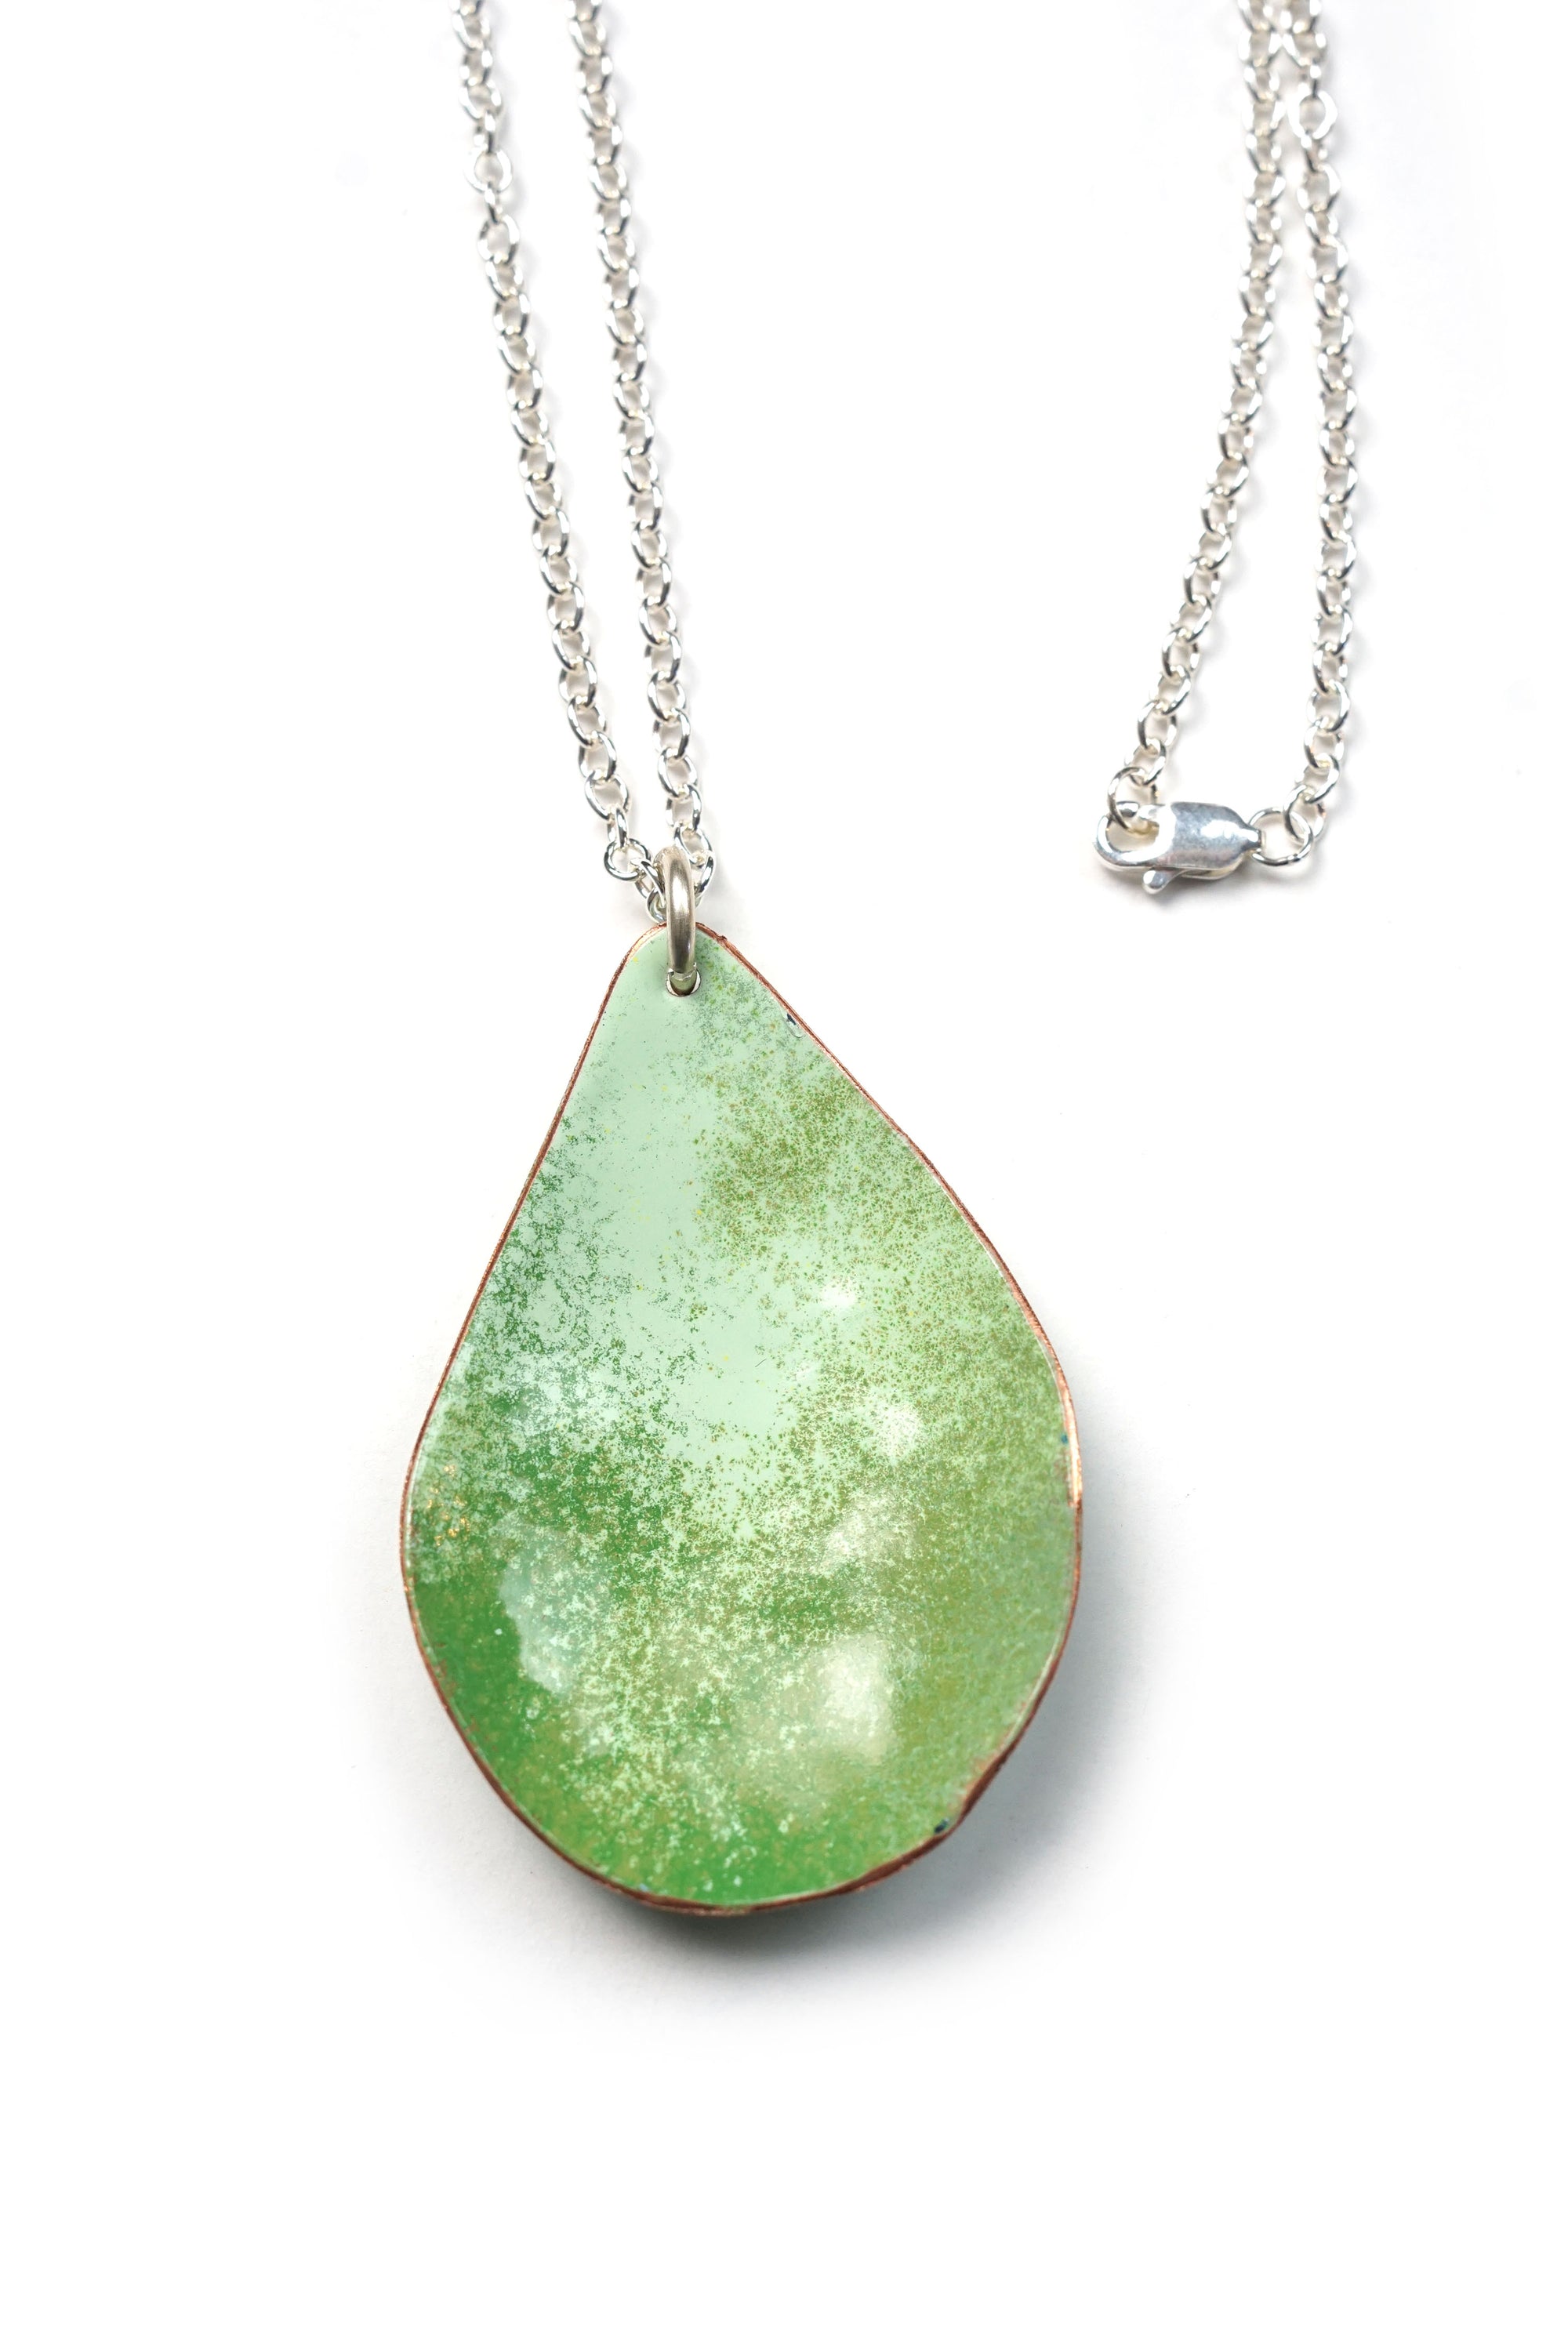 Chroma Pendant in Soft Mint and Fresh Green